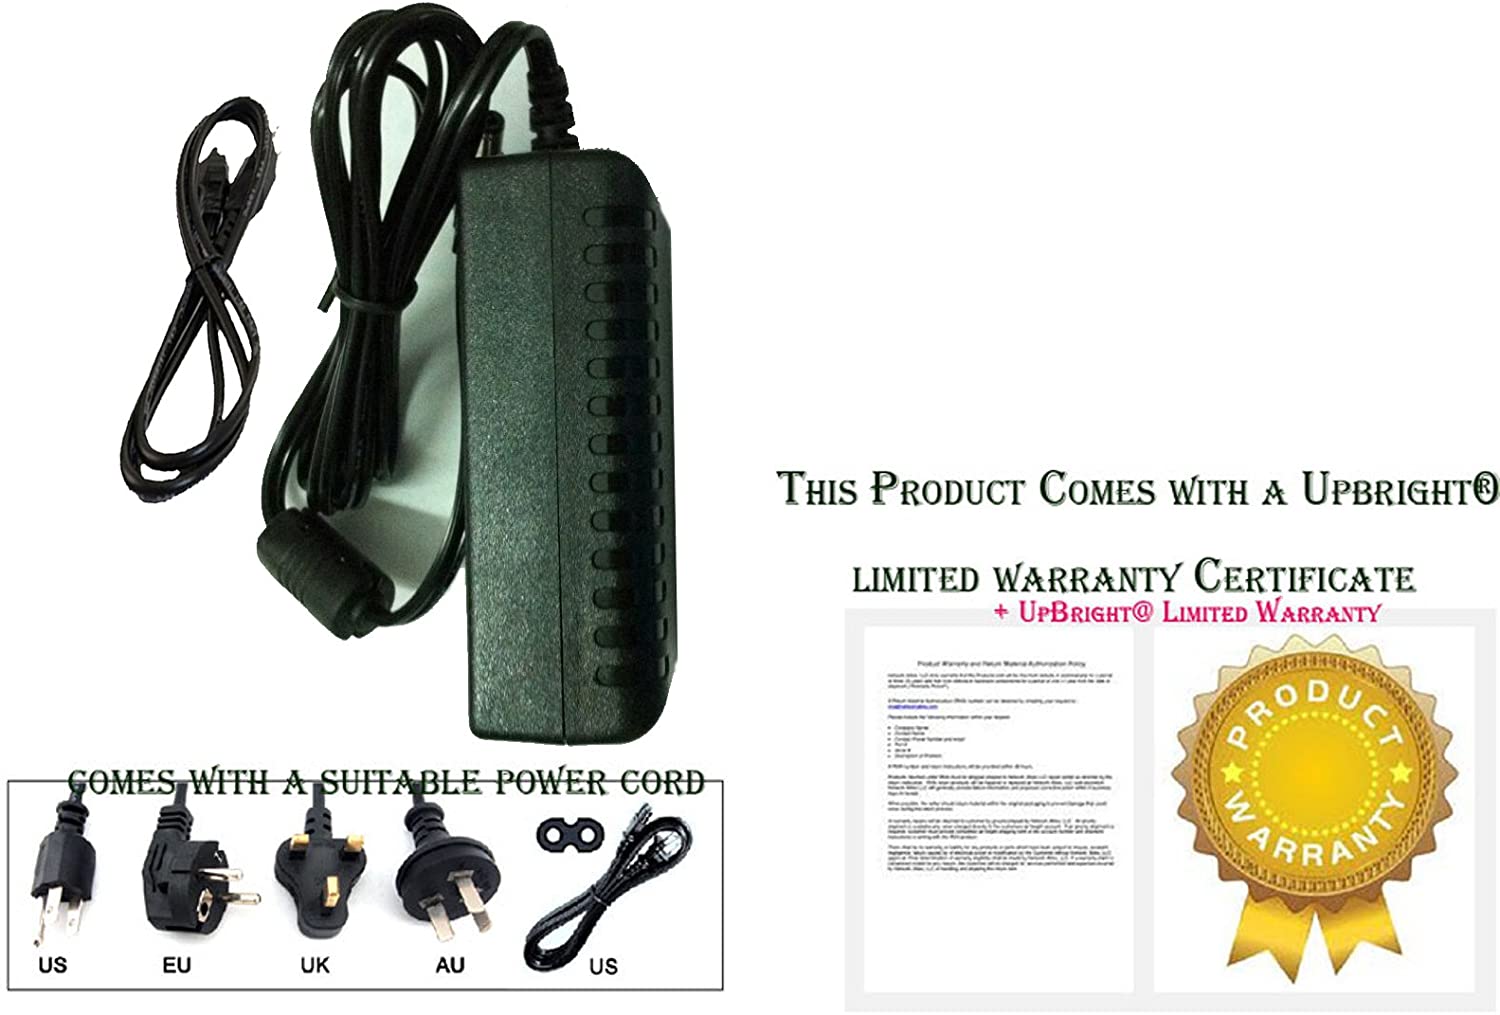 Cisco Aironet AIR-PWR-A Power Adapter - image 2 of 5